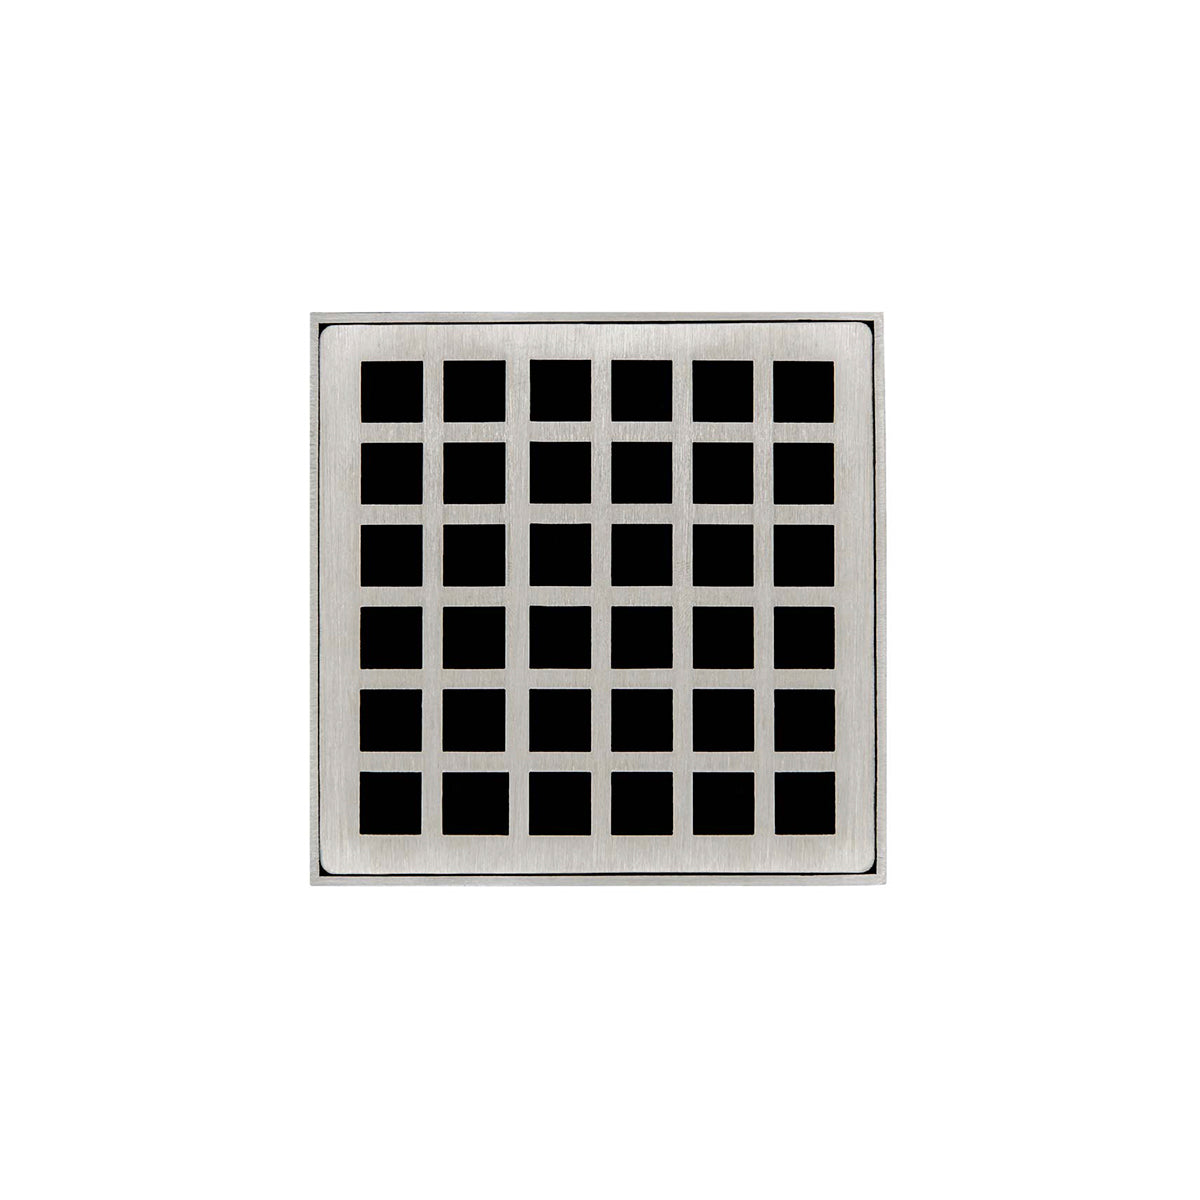 Infinity Drain 4" x 4" QD 4 Premium Center Drain Kit with Squares Pattern Decorative Plate with PVC Drain Body, 2" Outlet